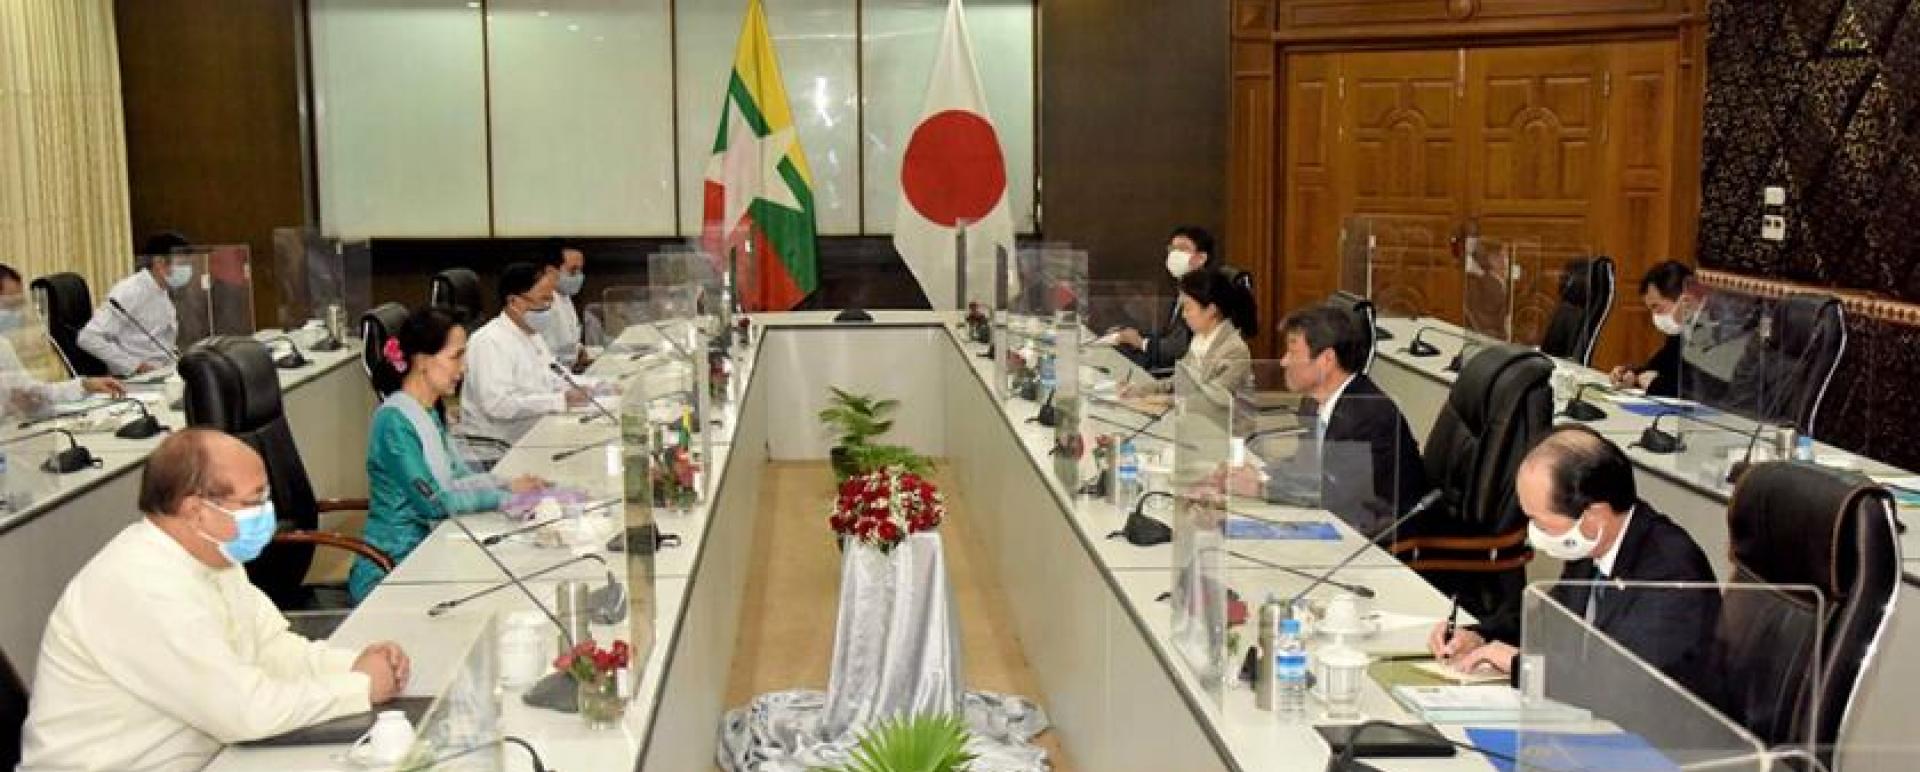 State Counsellor met with the Japanese Foreign Minister on August 24th